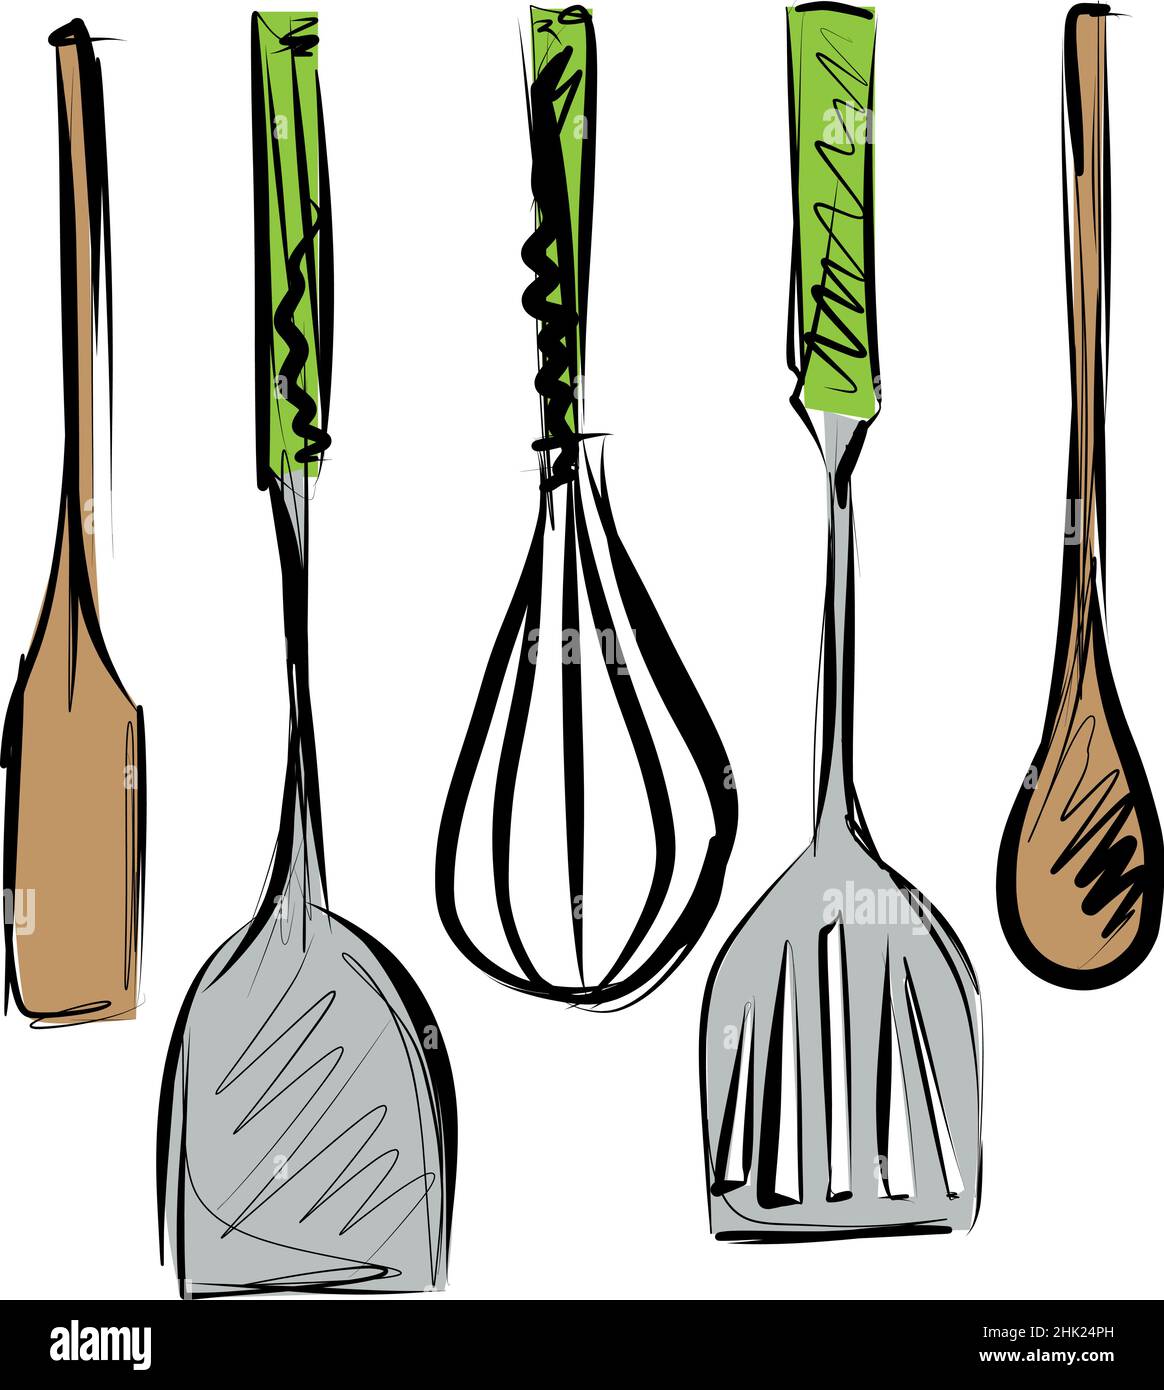 https://c8.alamy.com/comp/2HK24PH/sketch-of-kitchen-tools-and-cooking-utensils-icon-spatula-whisk-and-skimmer-vector-illustration-2HK24PH.jpg